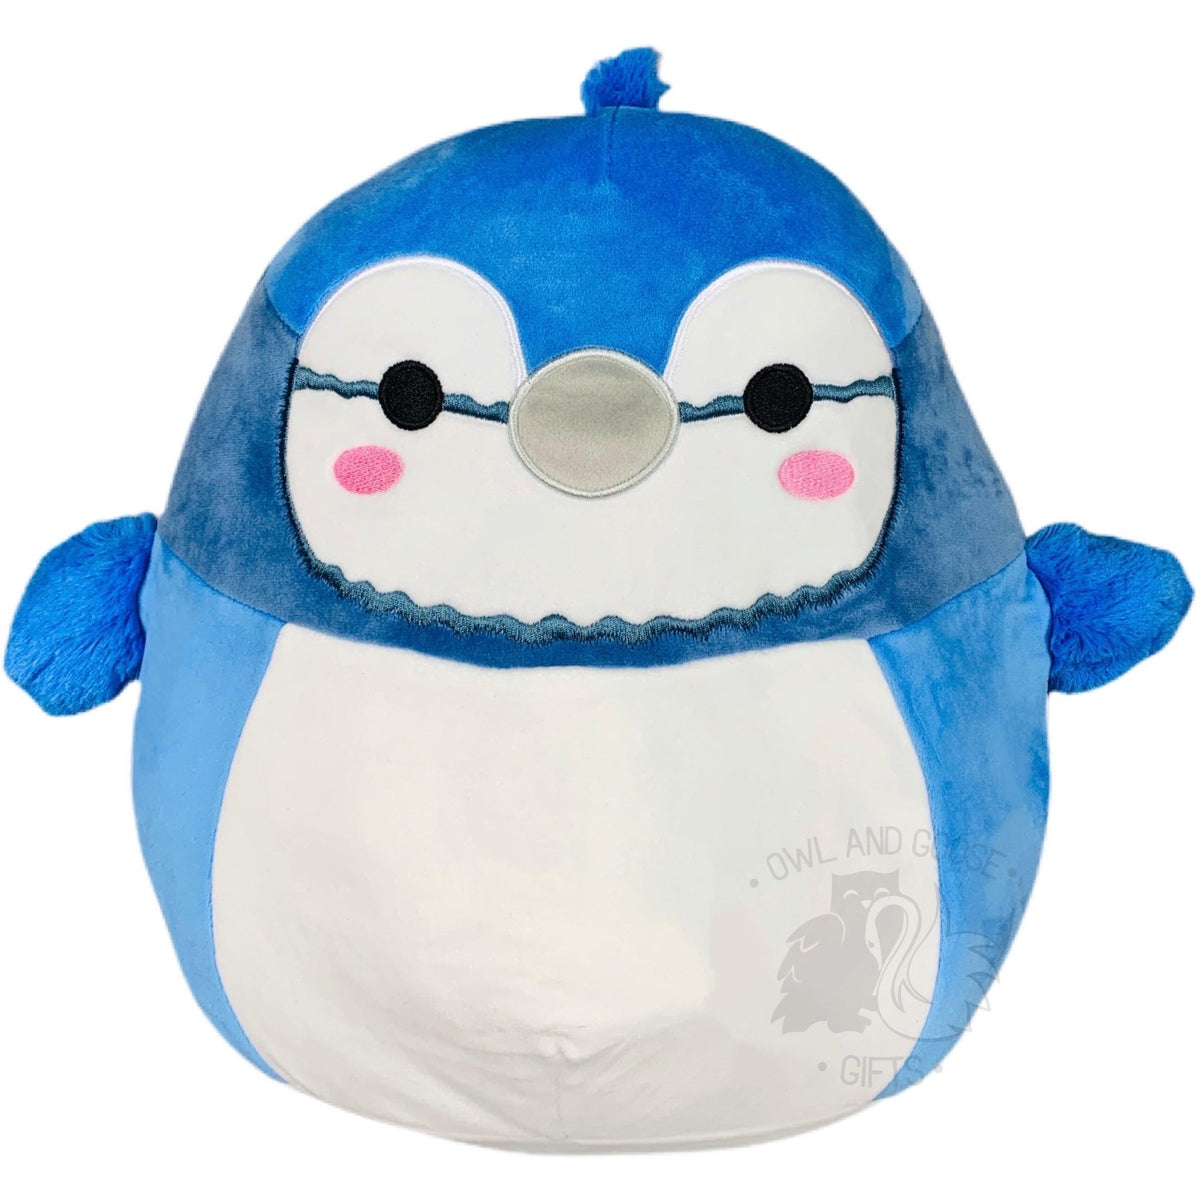 Squishmallow 12 Inch Babs the Blue Jay Plush Toy - Owl & Goose Gifts